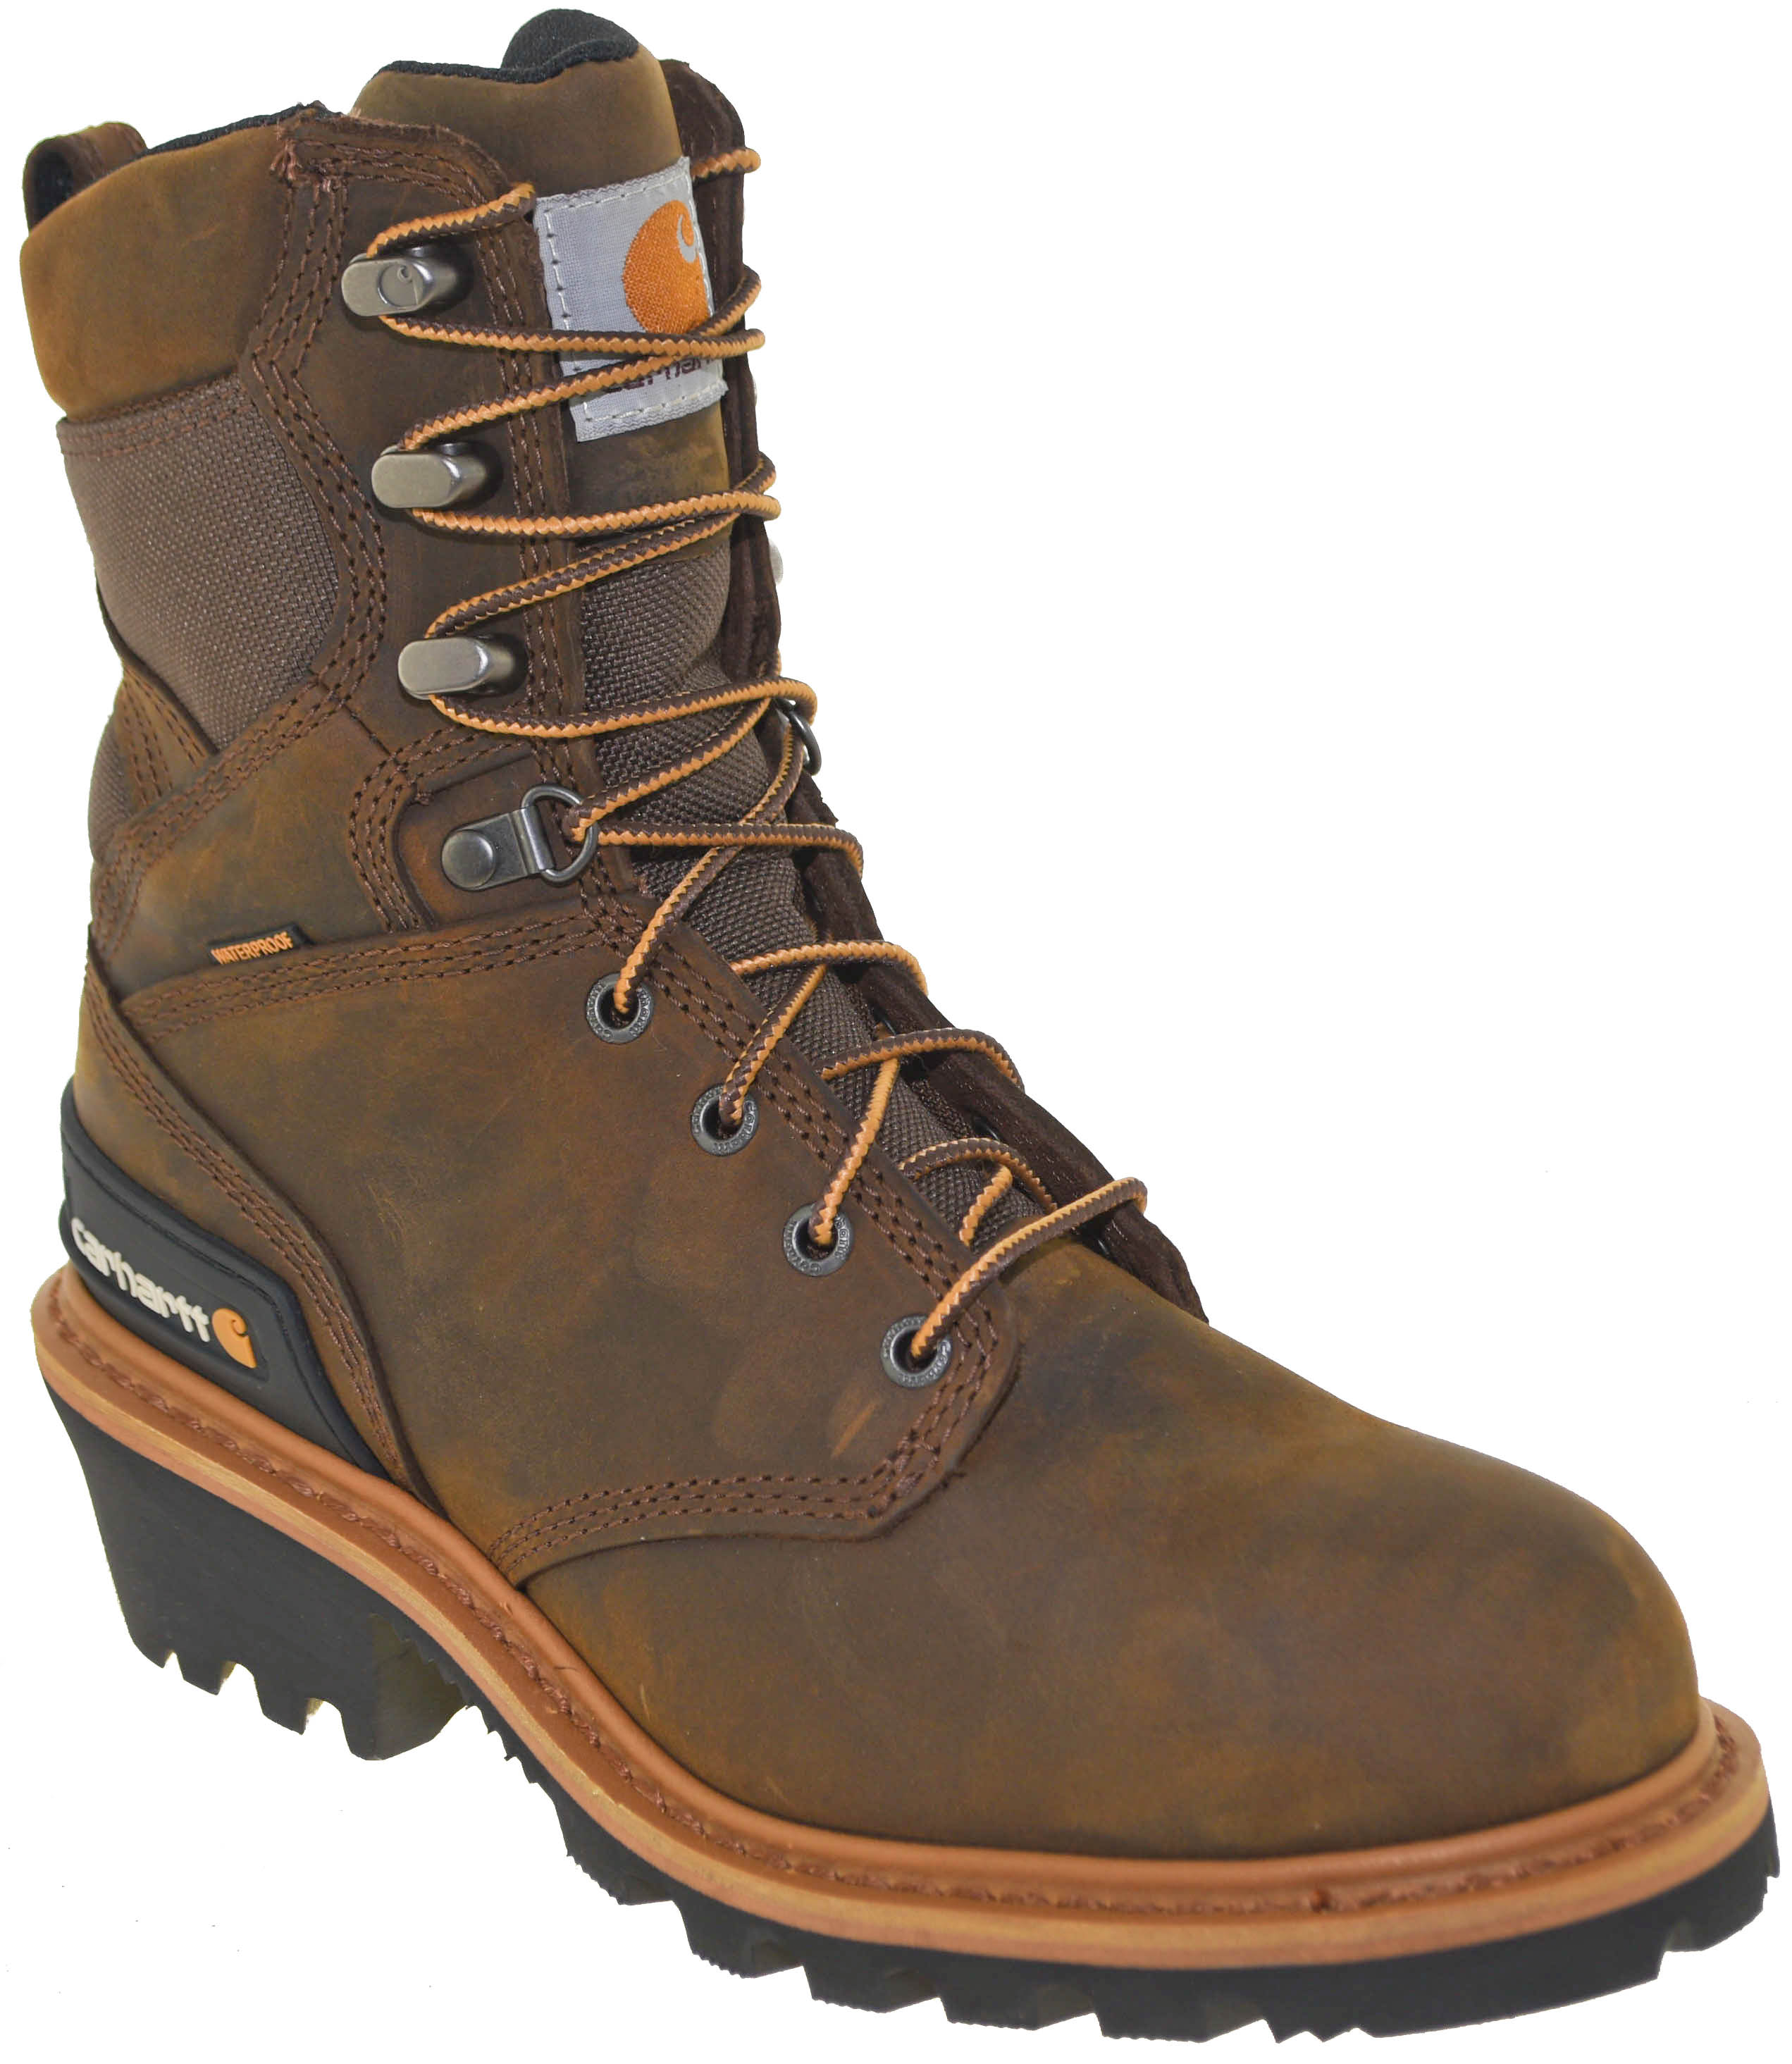 Carhartt Men's Waterproof Insulated Soft Toe Logger Work Boots Style ...